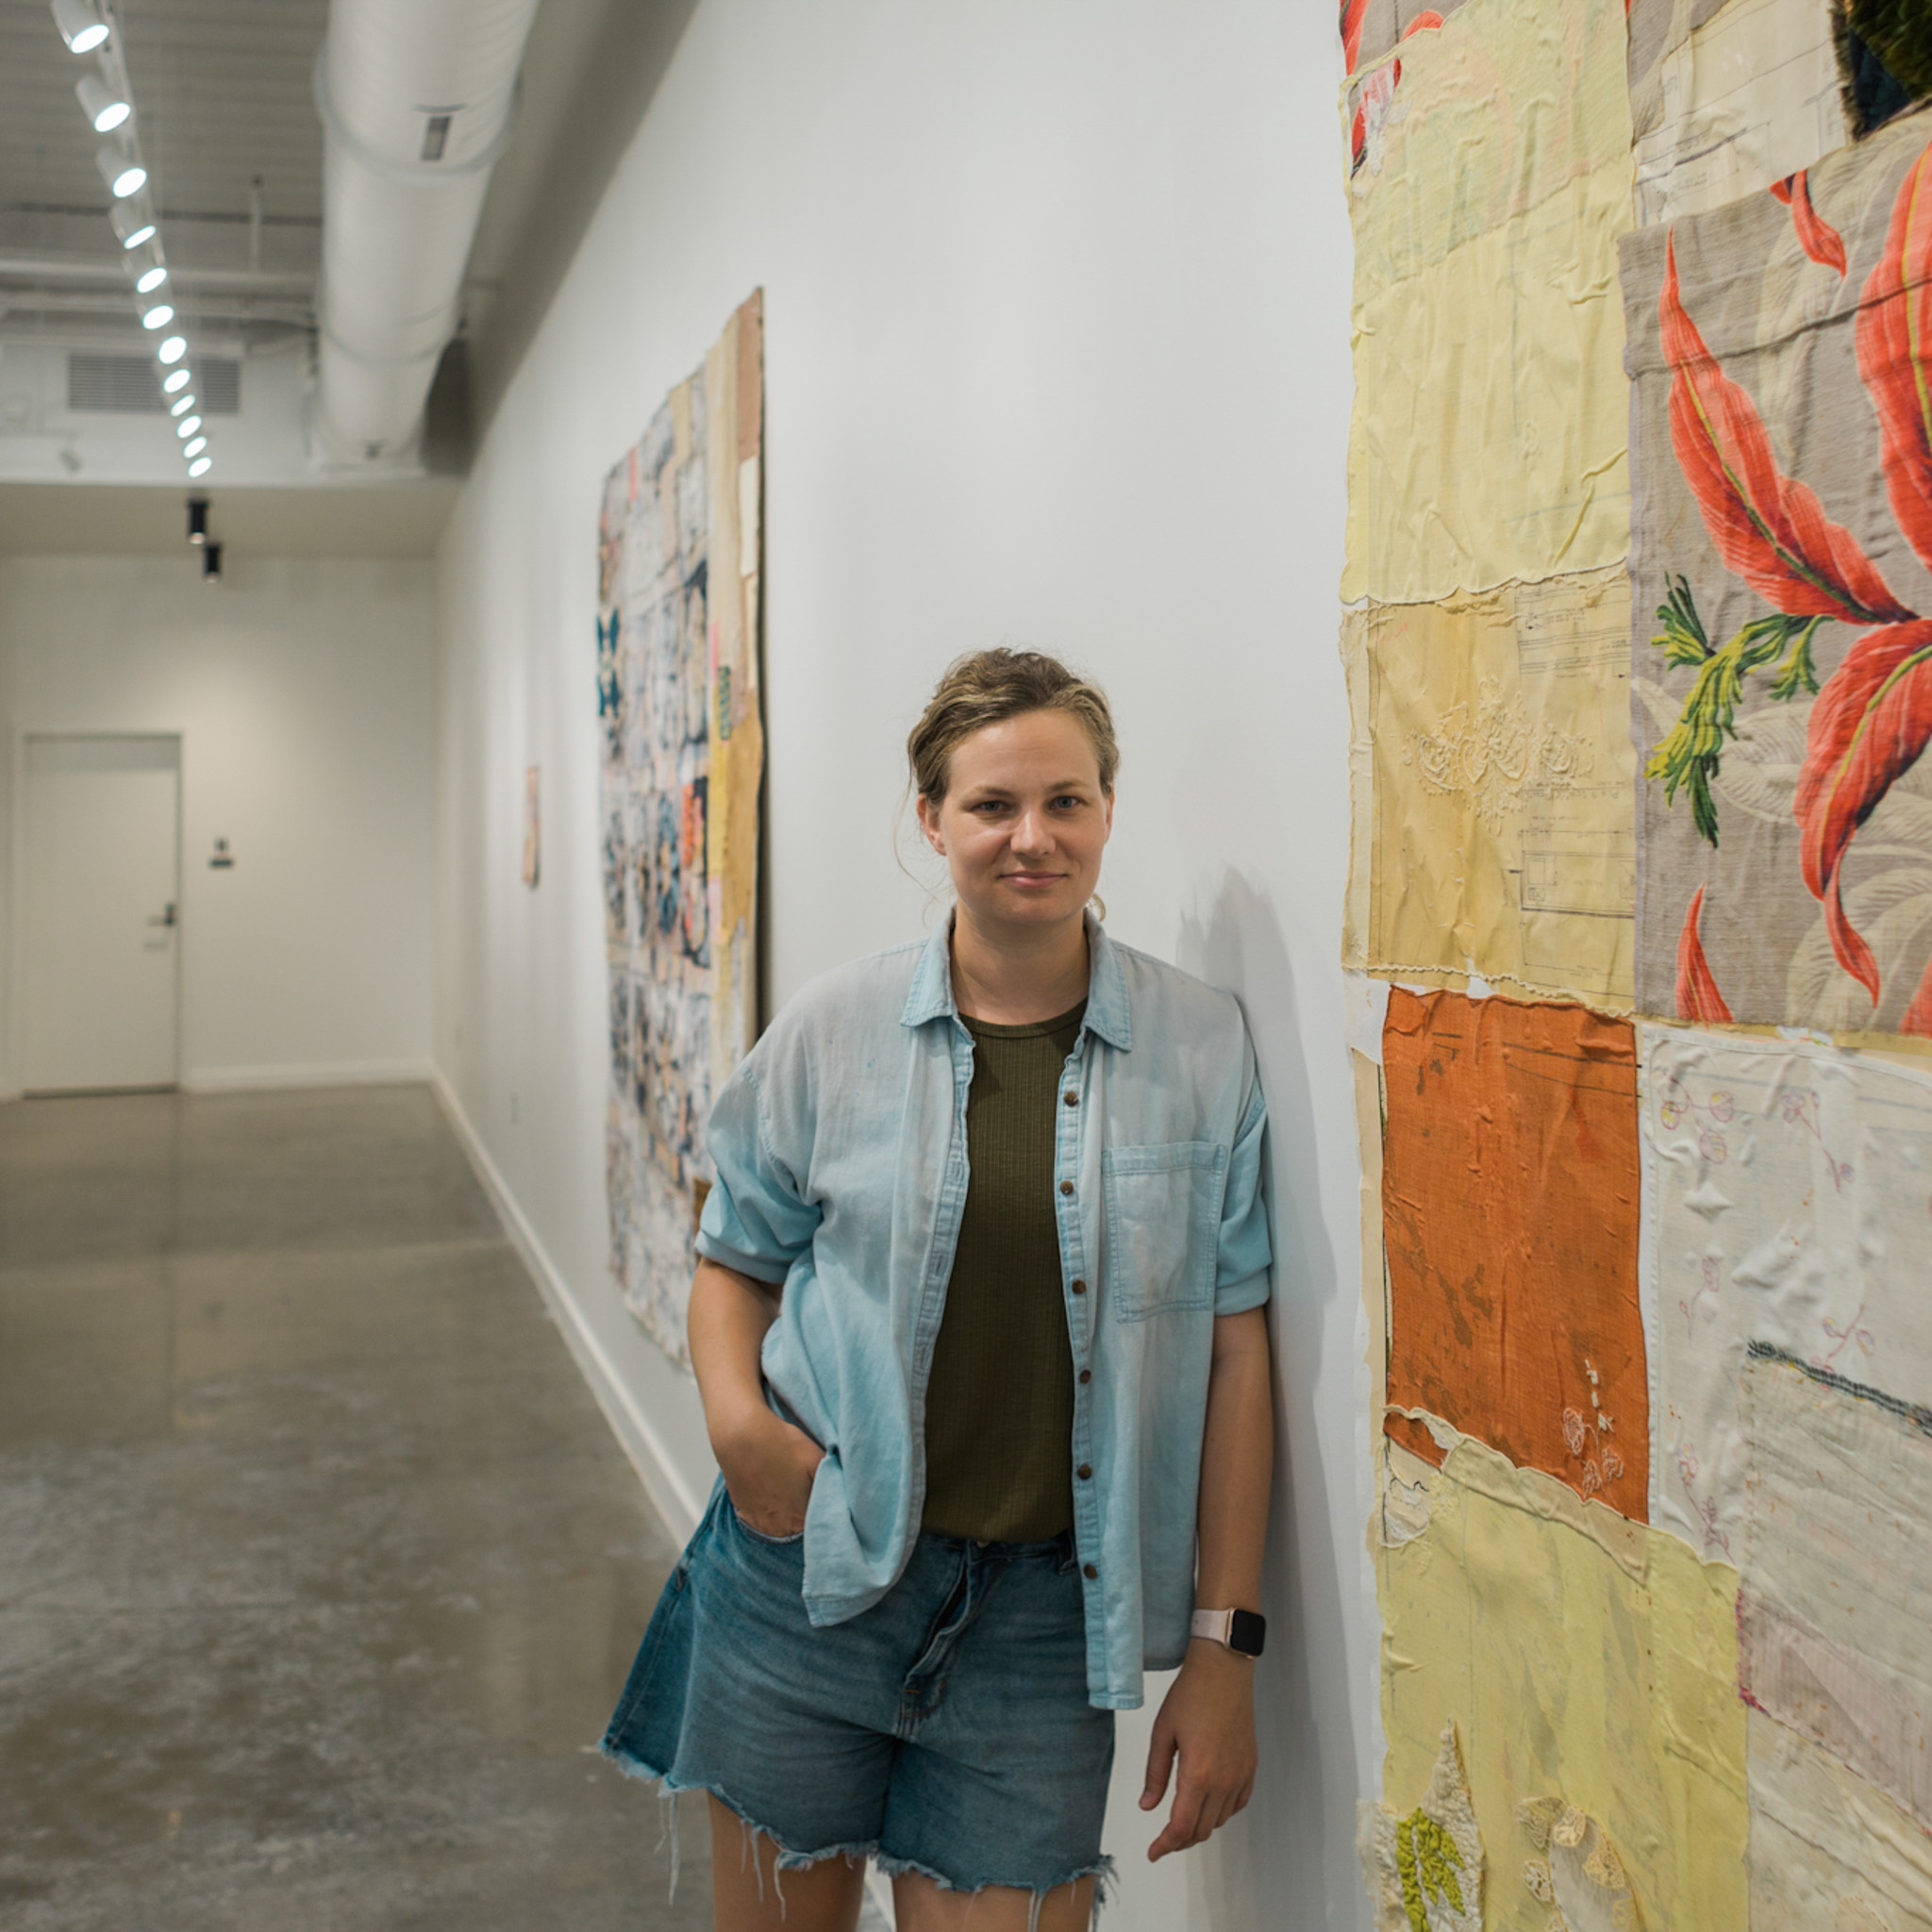 Woman leaning on wall next to artwork.